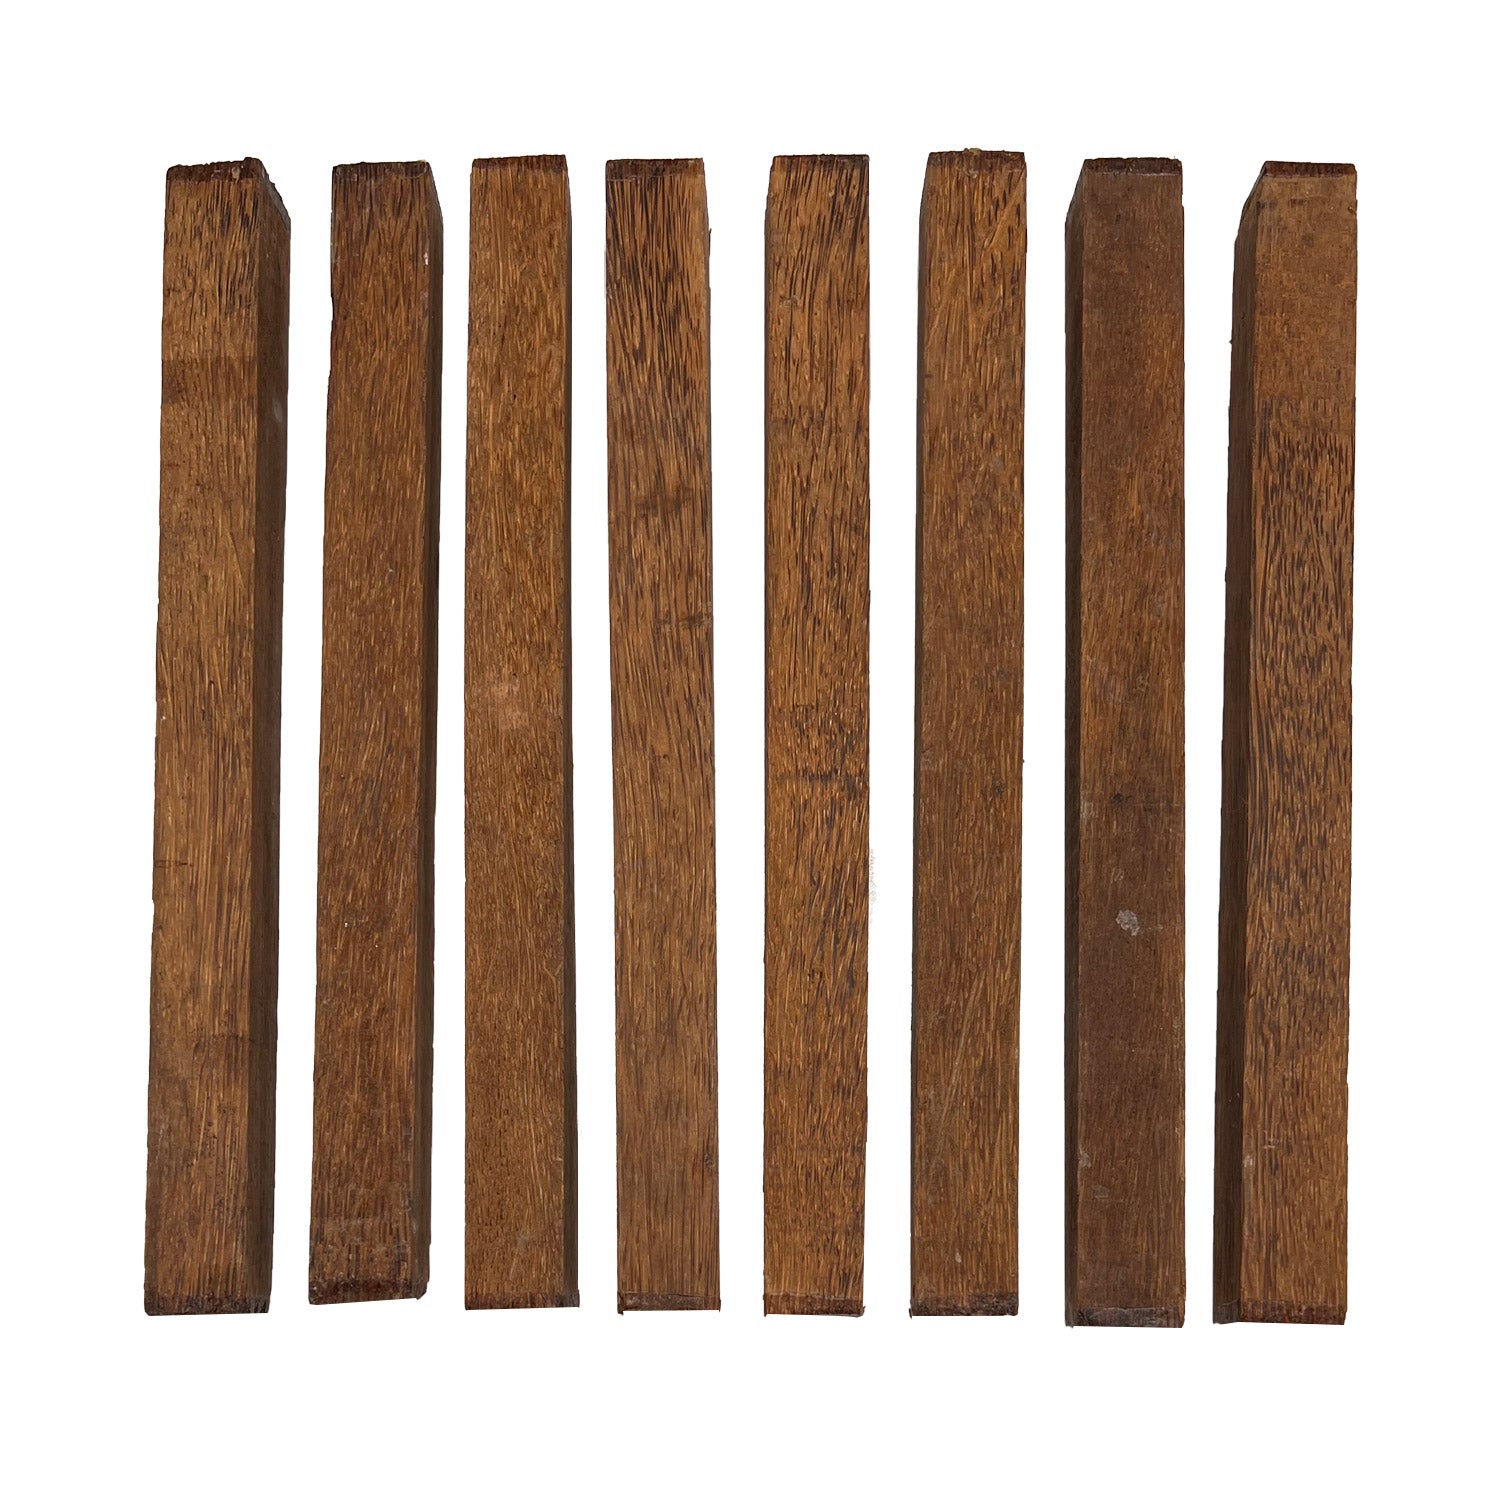 Pack of 8 Red Palm Hardwood Turning Square Wood Blanks 1 x 1 x 12 inches - Exotic Wood Zone - Buy online Across USA 